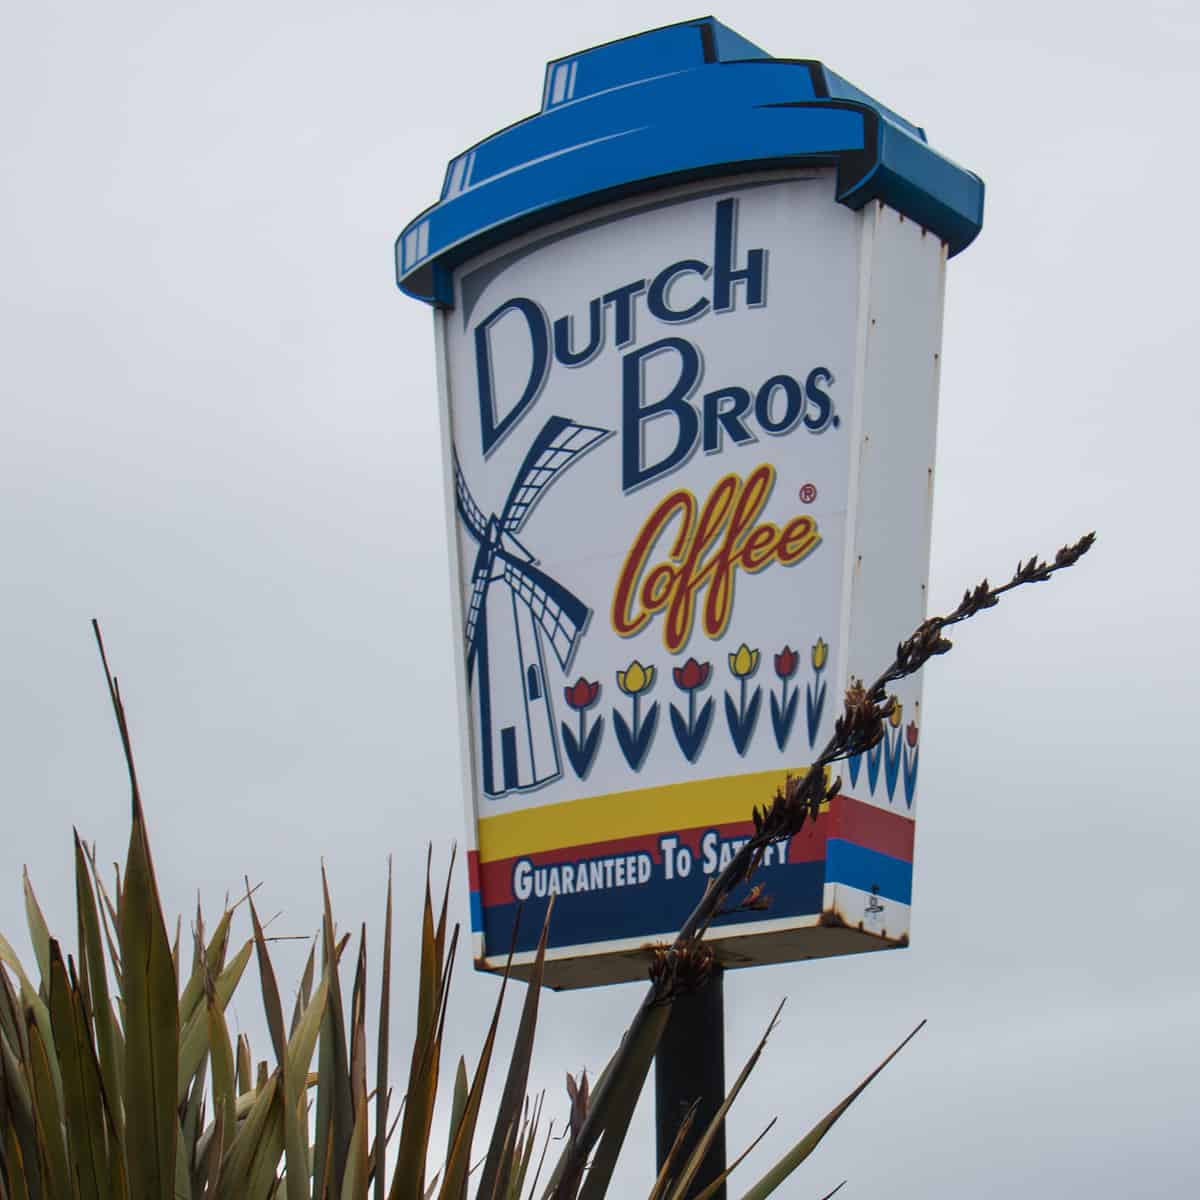 dutch bros - one of the largest and most famous coffee chains in the world